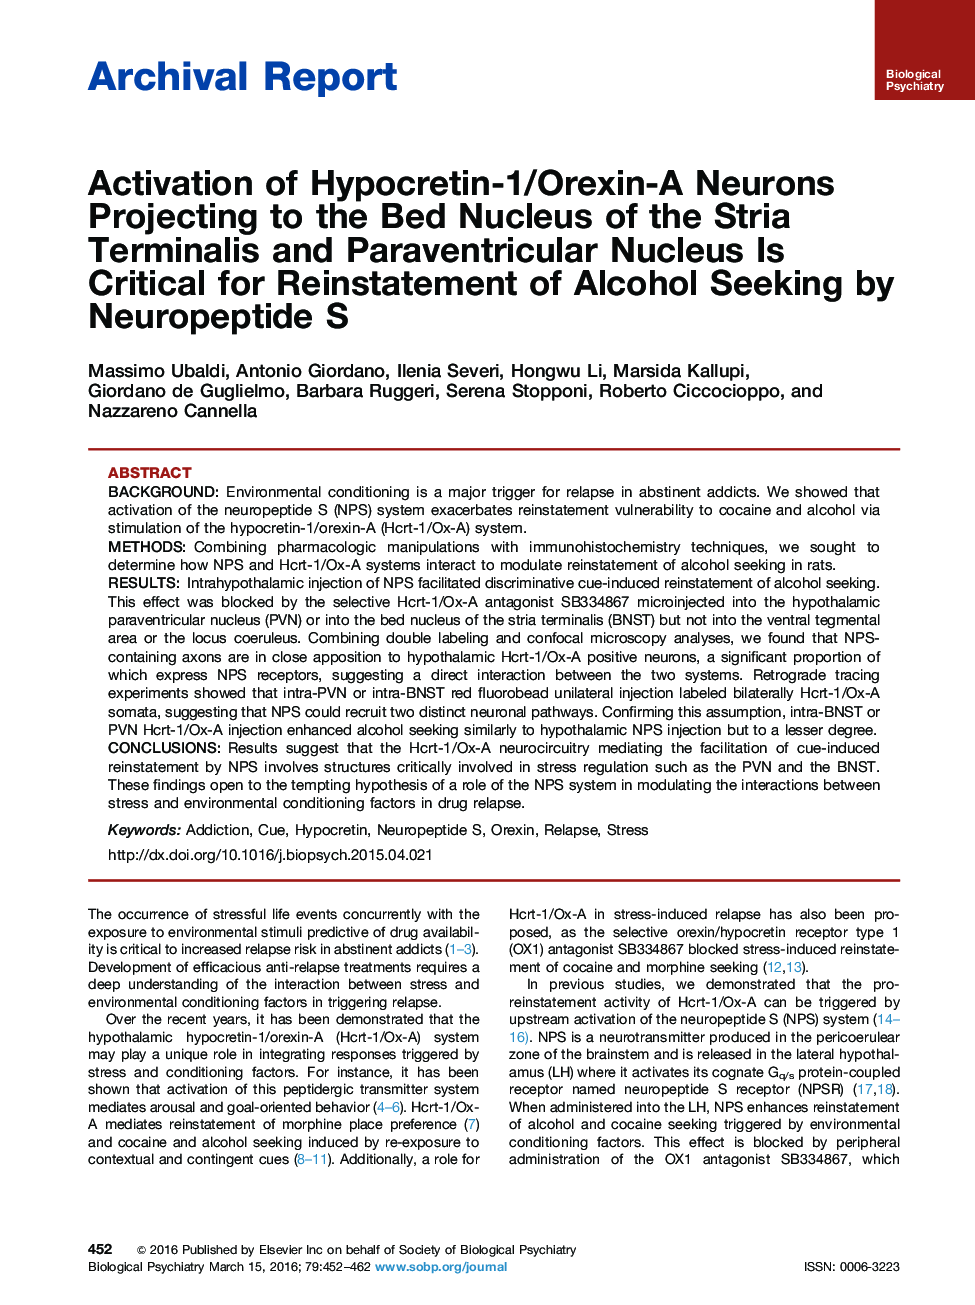 Activation of Hypocretin-1/Orexin-A Neurons Projecting to the Bed Nucleus of the Stria Terminalis and Paraventricular Nucleus Is Critical for Reinstatement of Alcohol Seeking by Neuropeptide S